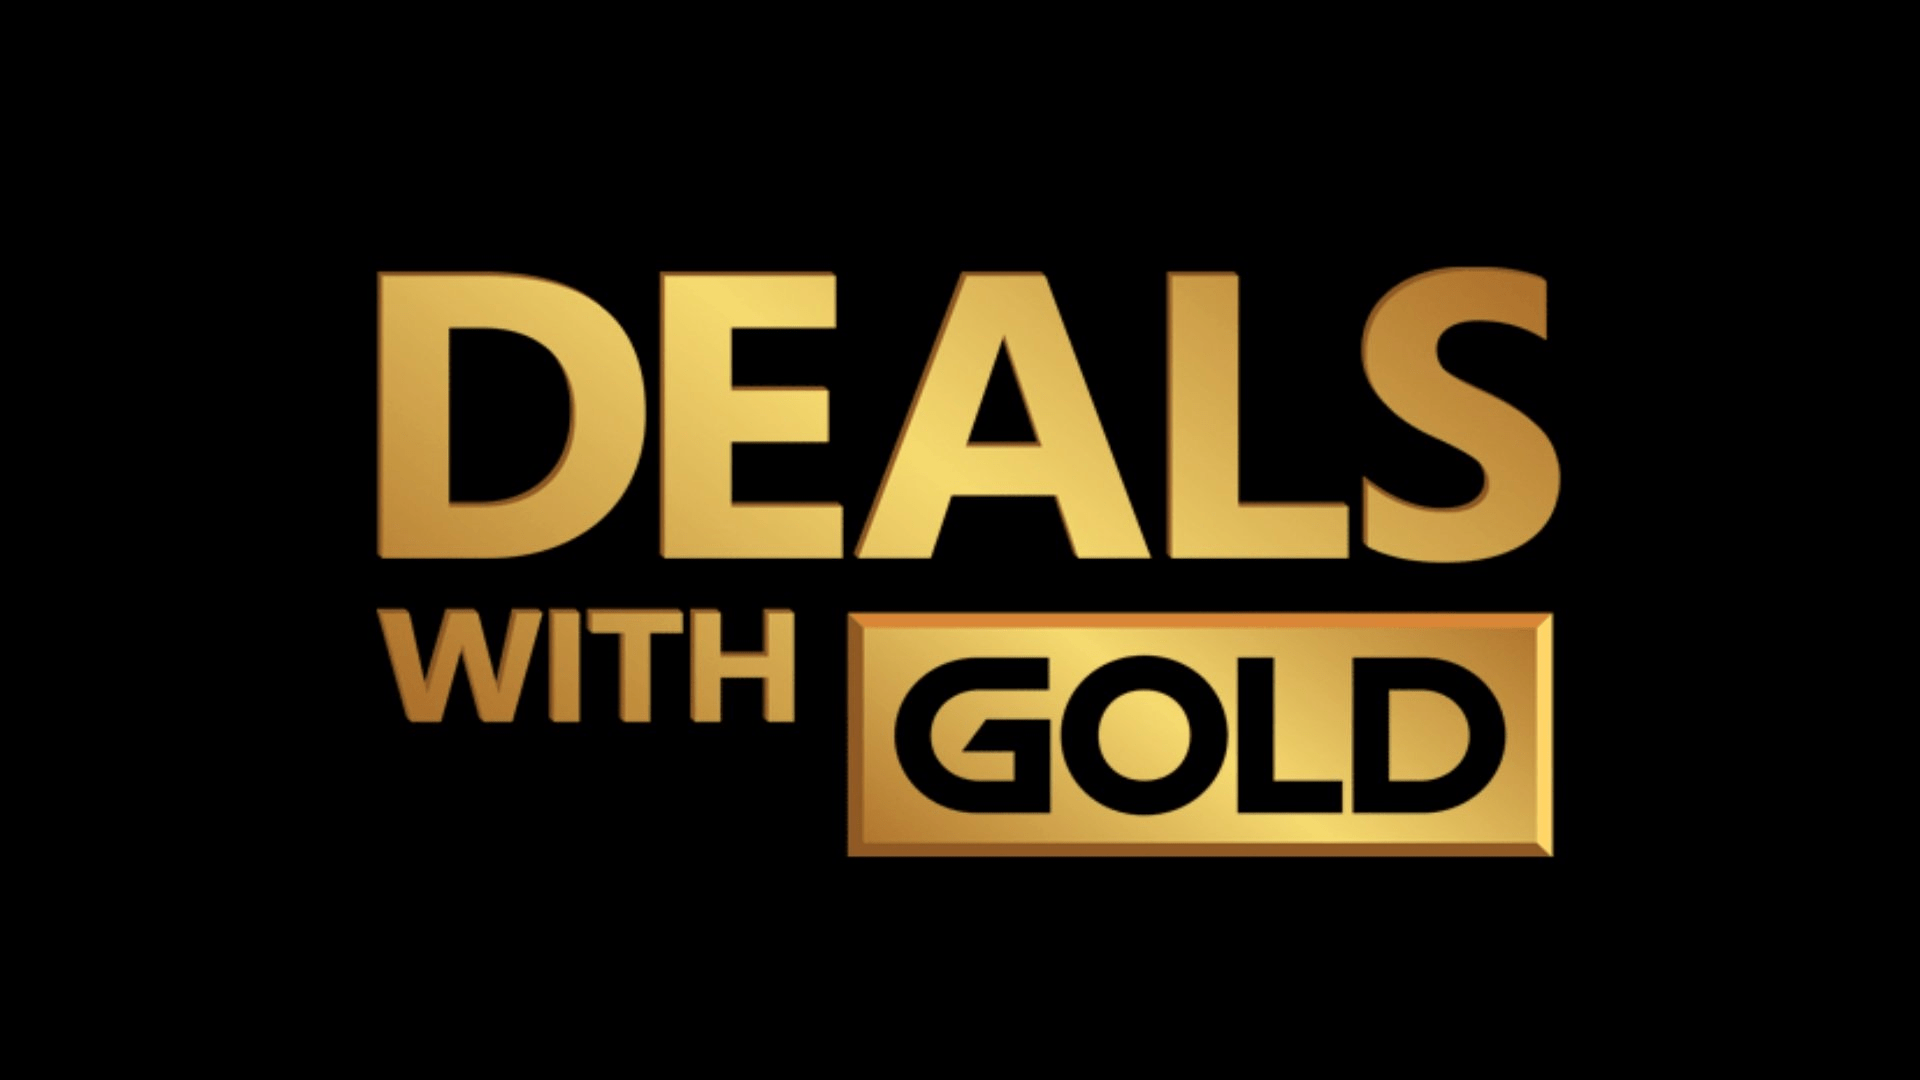 This Week's Deals with Gold and Spotlight Sale, Plus Xbox Black Friday Sale